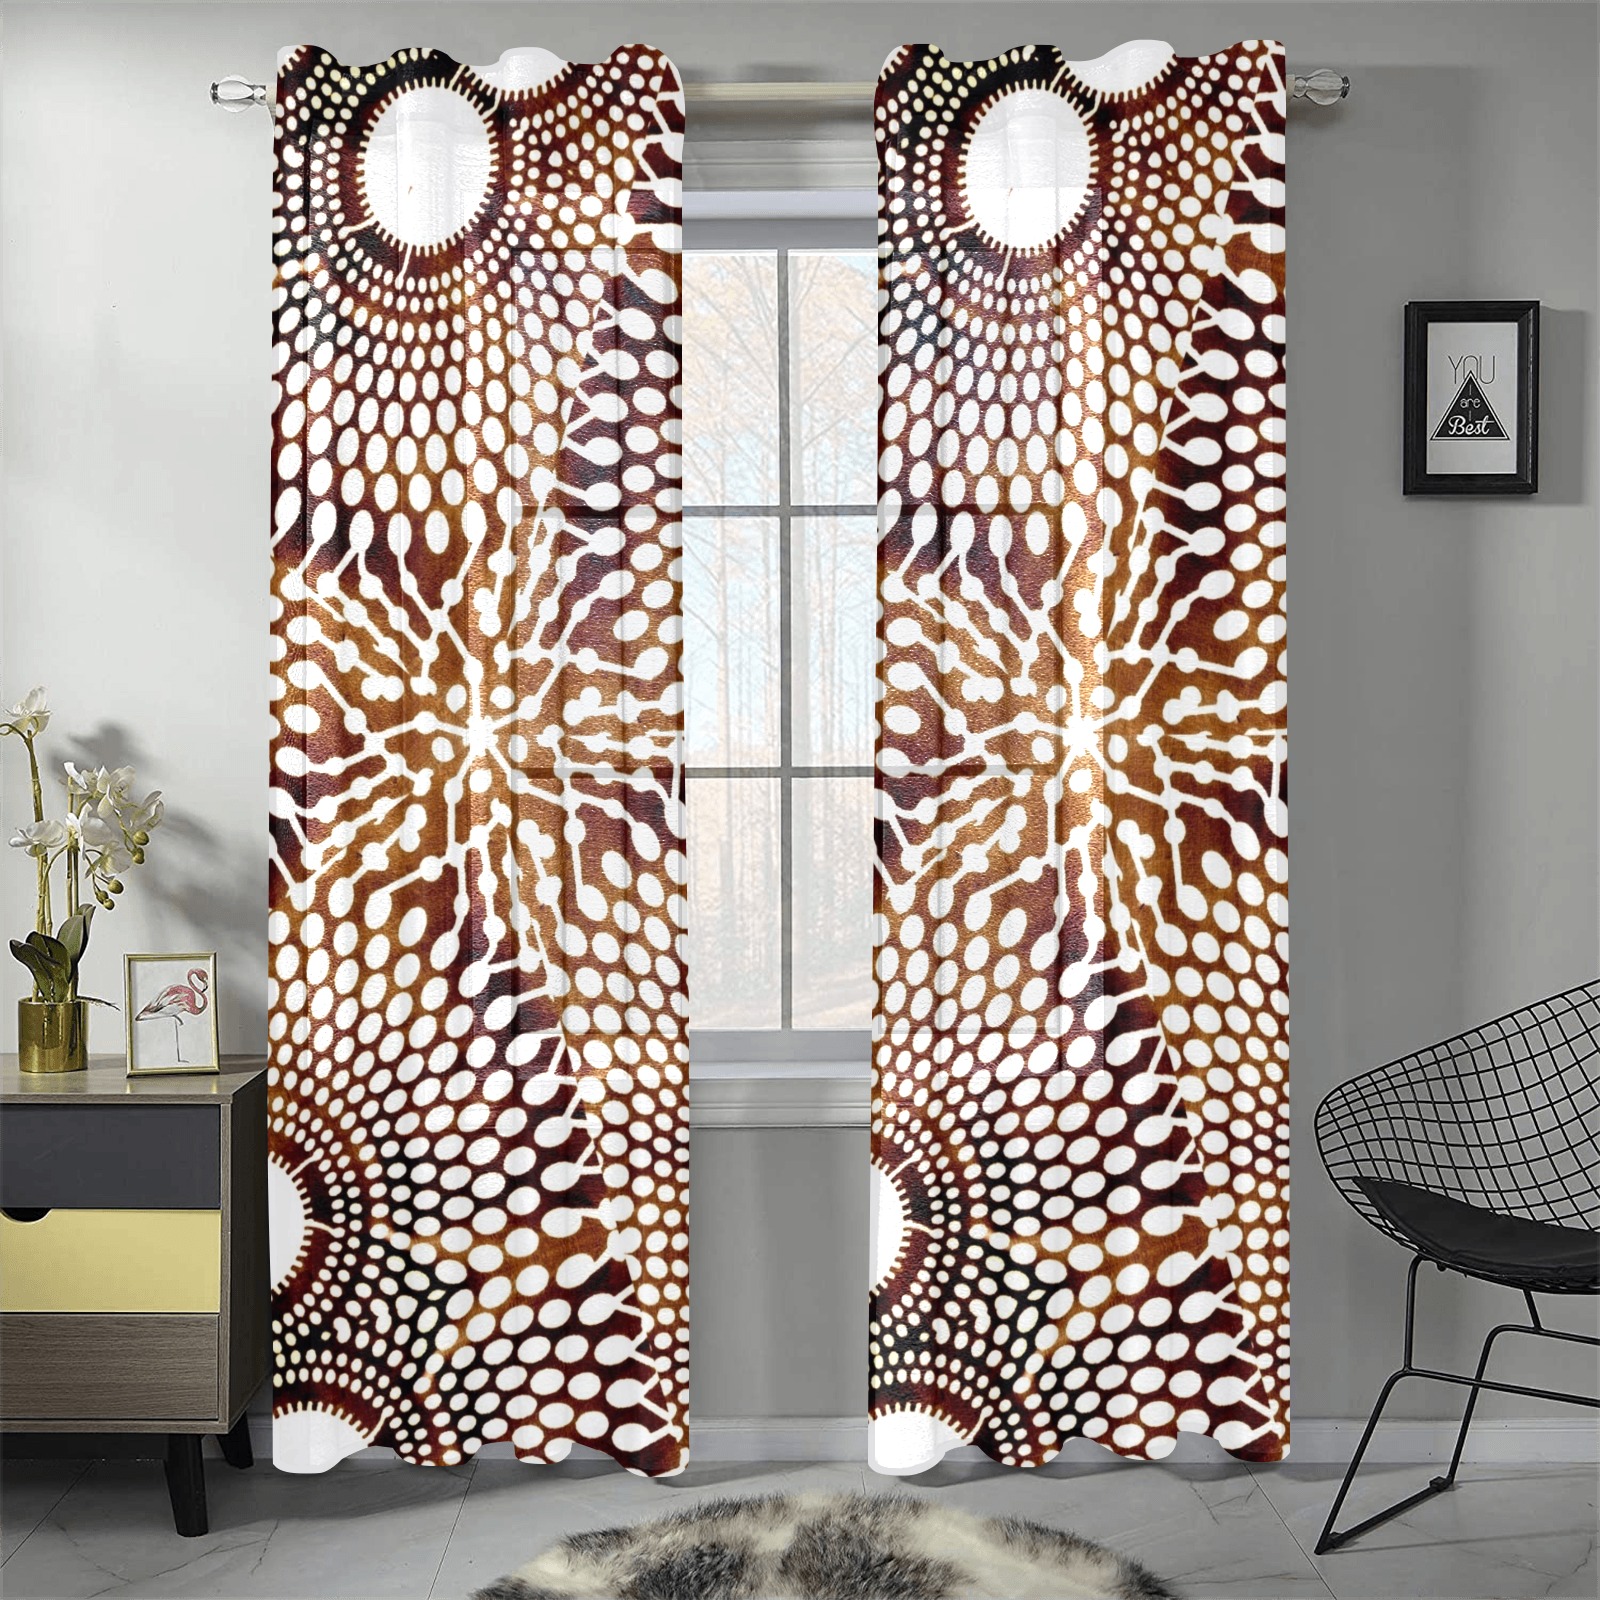 AFRICAN PRINT PATTERN 4 Gauze Curtain 28"x84" (Two-Piece)